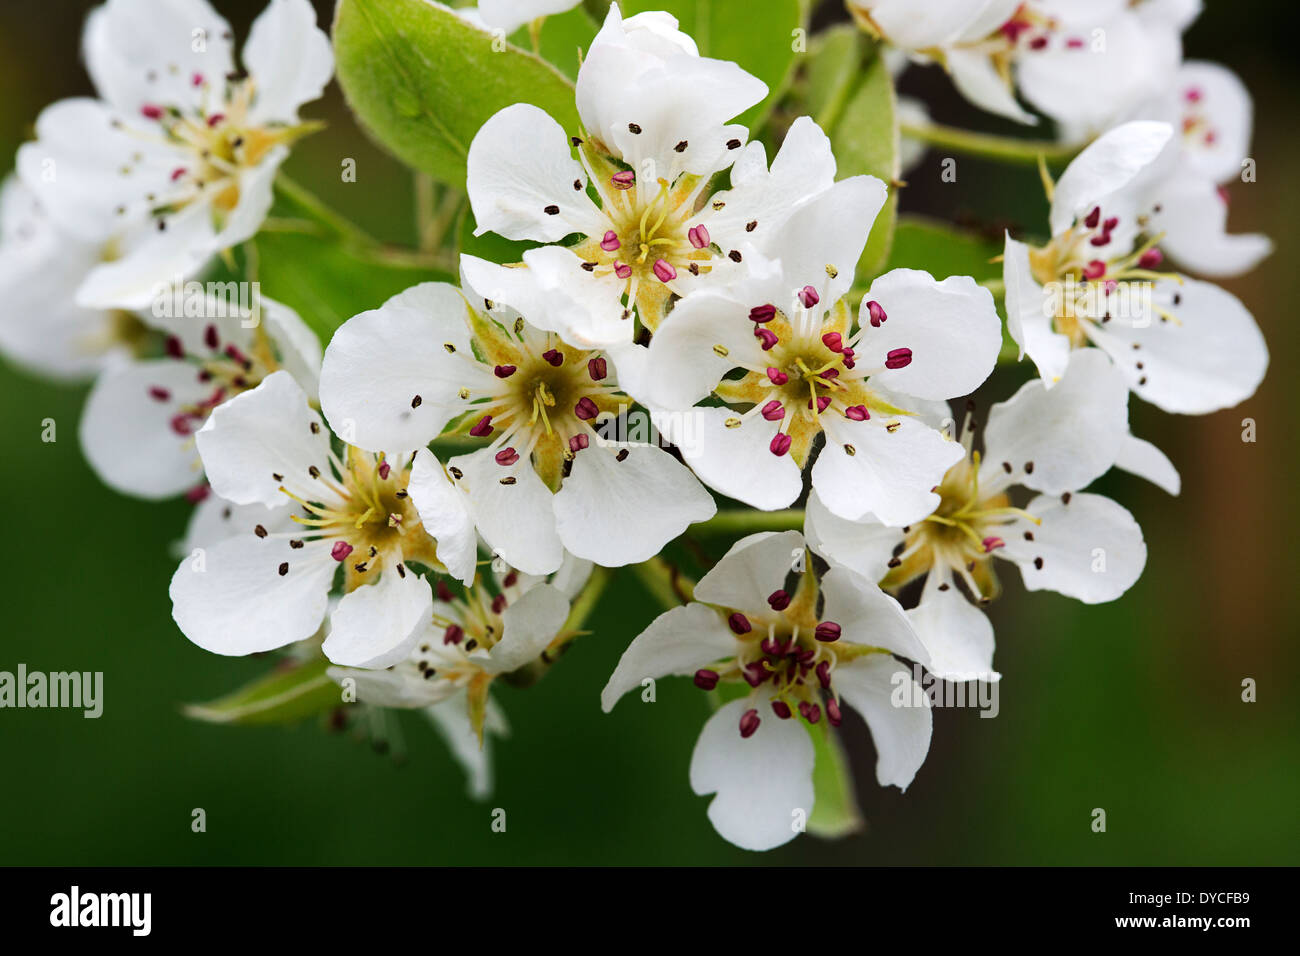 Blossoming Pear (Pyrus sp.) Stock Photo